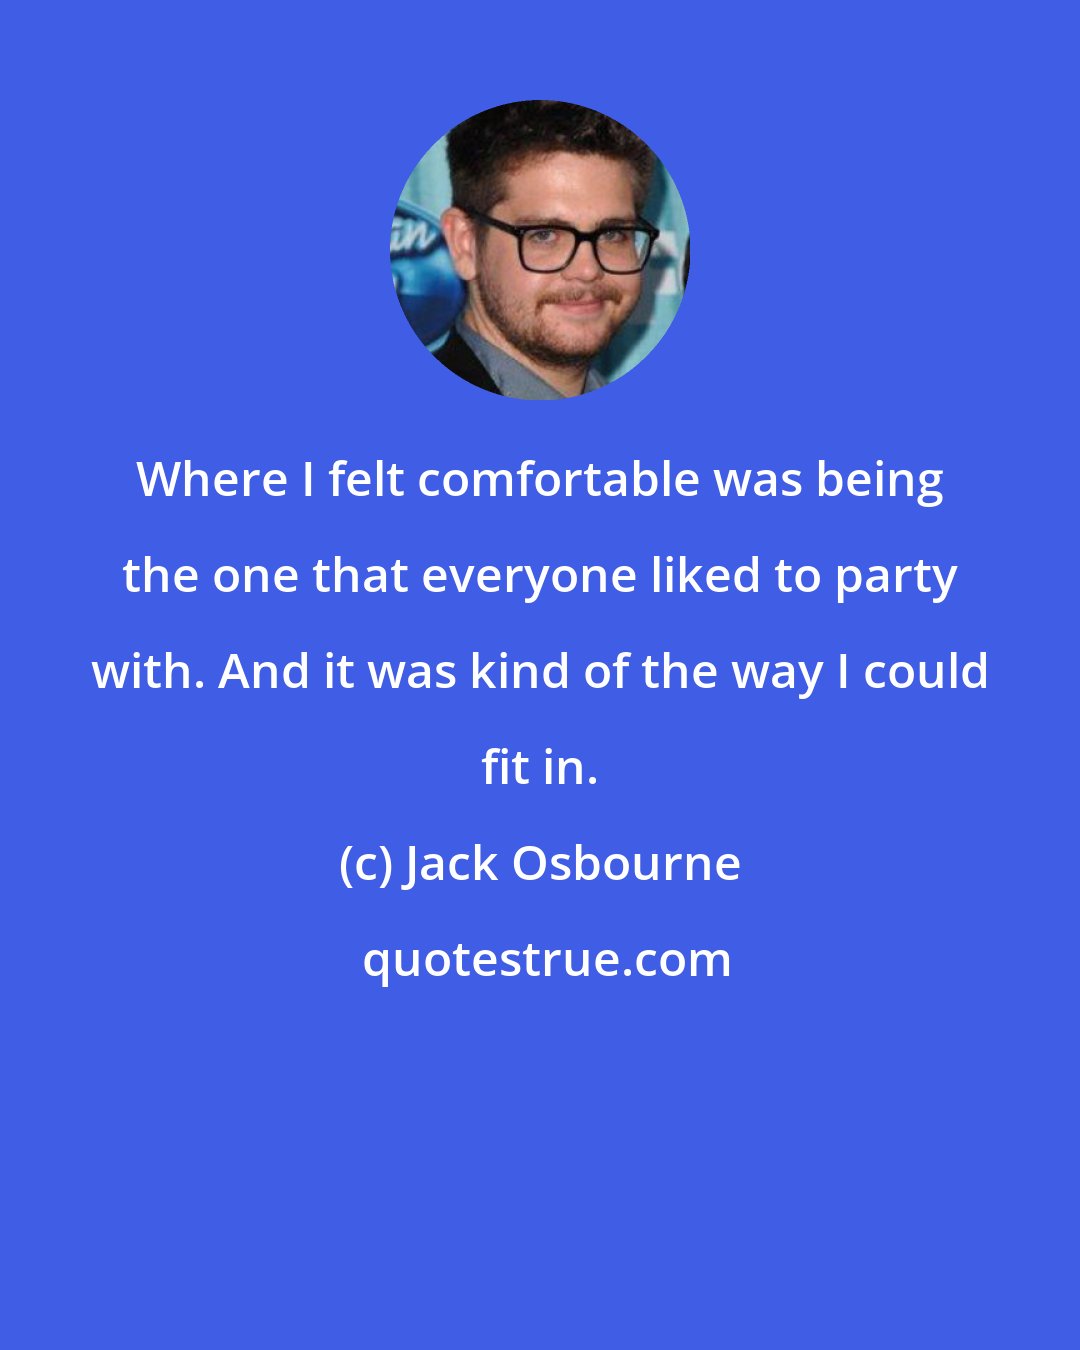 Jack Osbourne: Where I felt comfortable was being the one that everyone liked to party with. And it was kind of the way I could fit in.